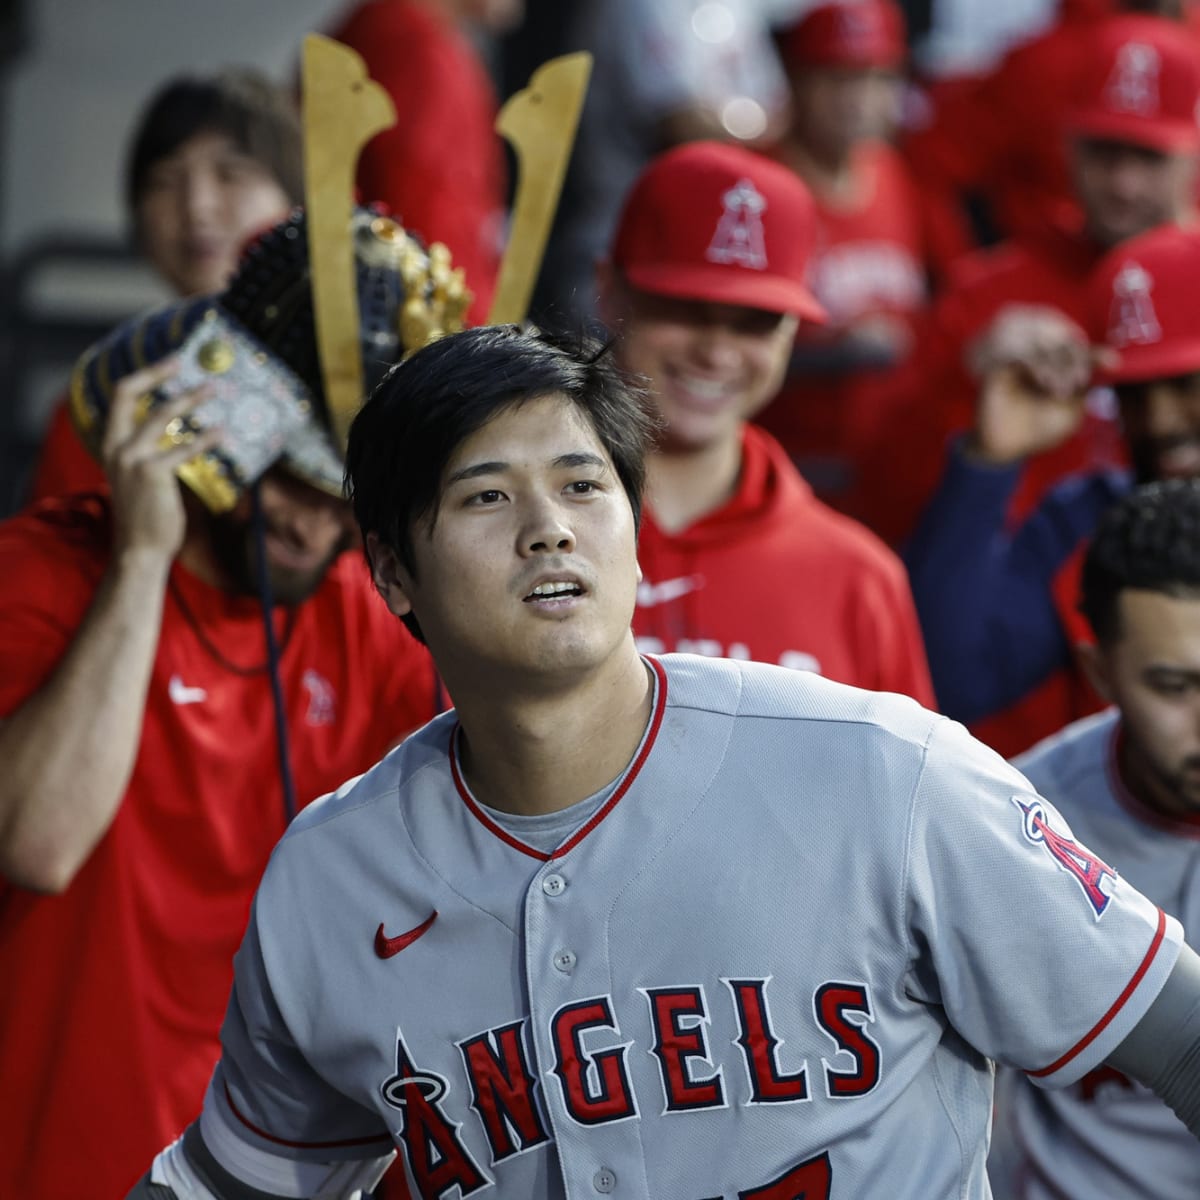 New York Mets fans excited as team is reportedly front-runner to land Shohei  Ohtani: Senga and Ohtani could lead the Mets